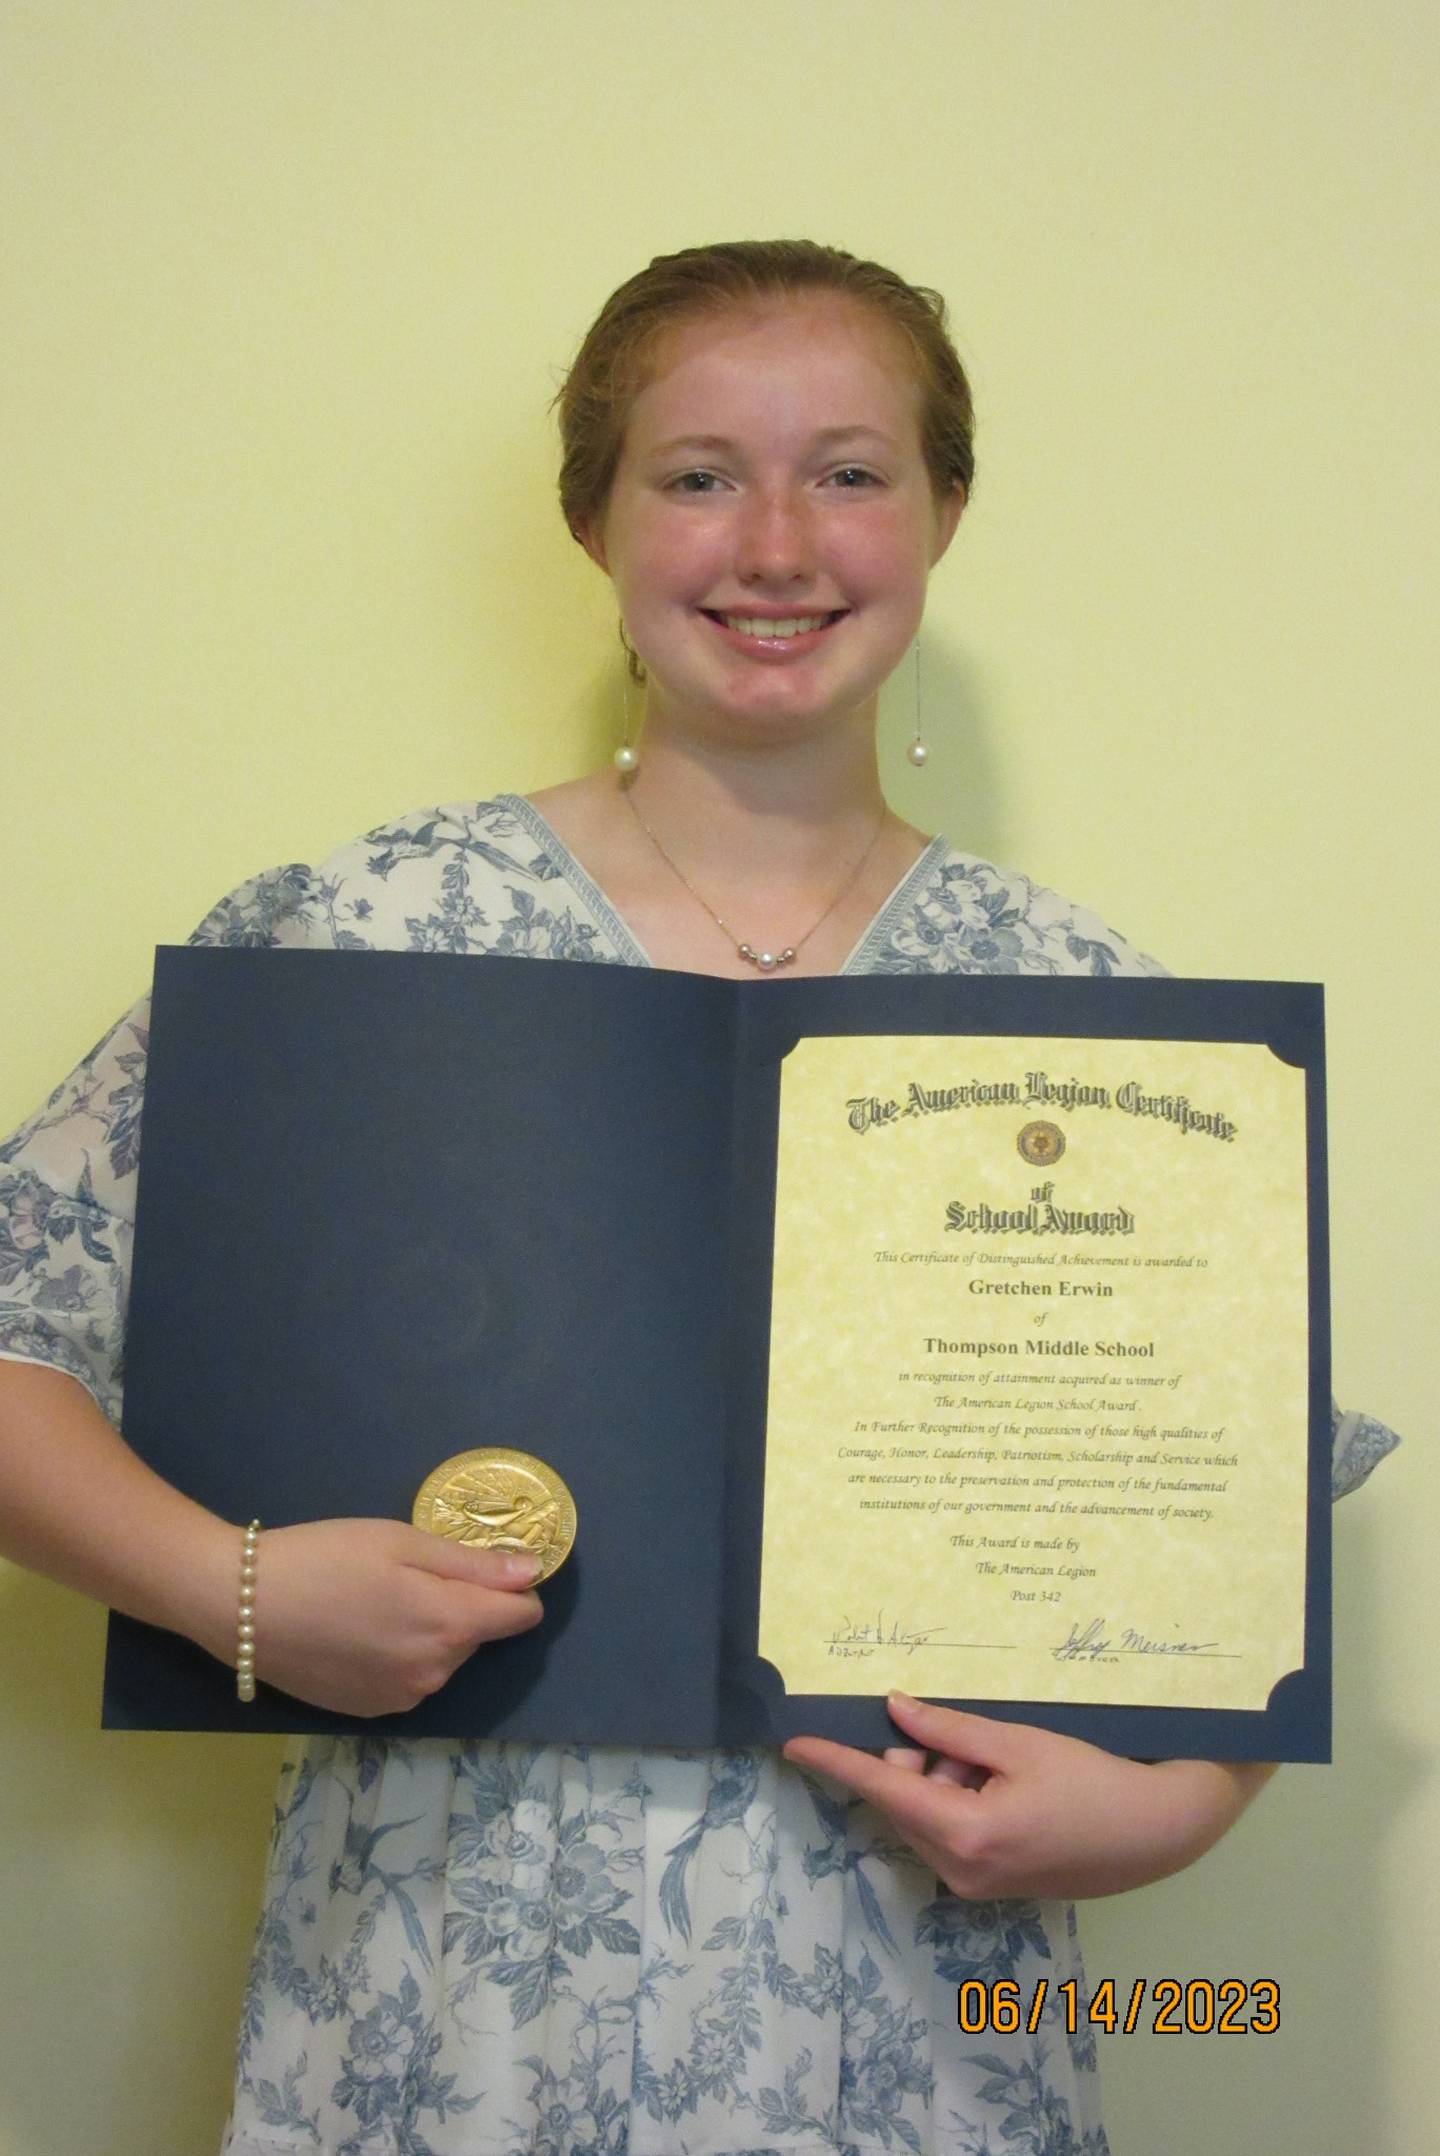 Gretchen Erwin, a student at Thompson Middle School, is one of four St. Charles middle school students to receive the American Legion Award.